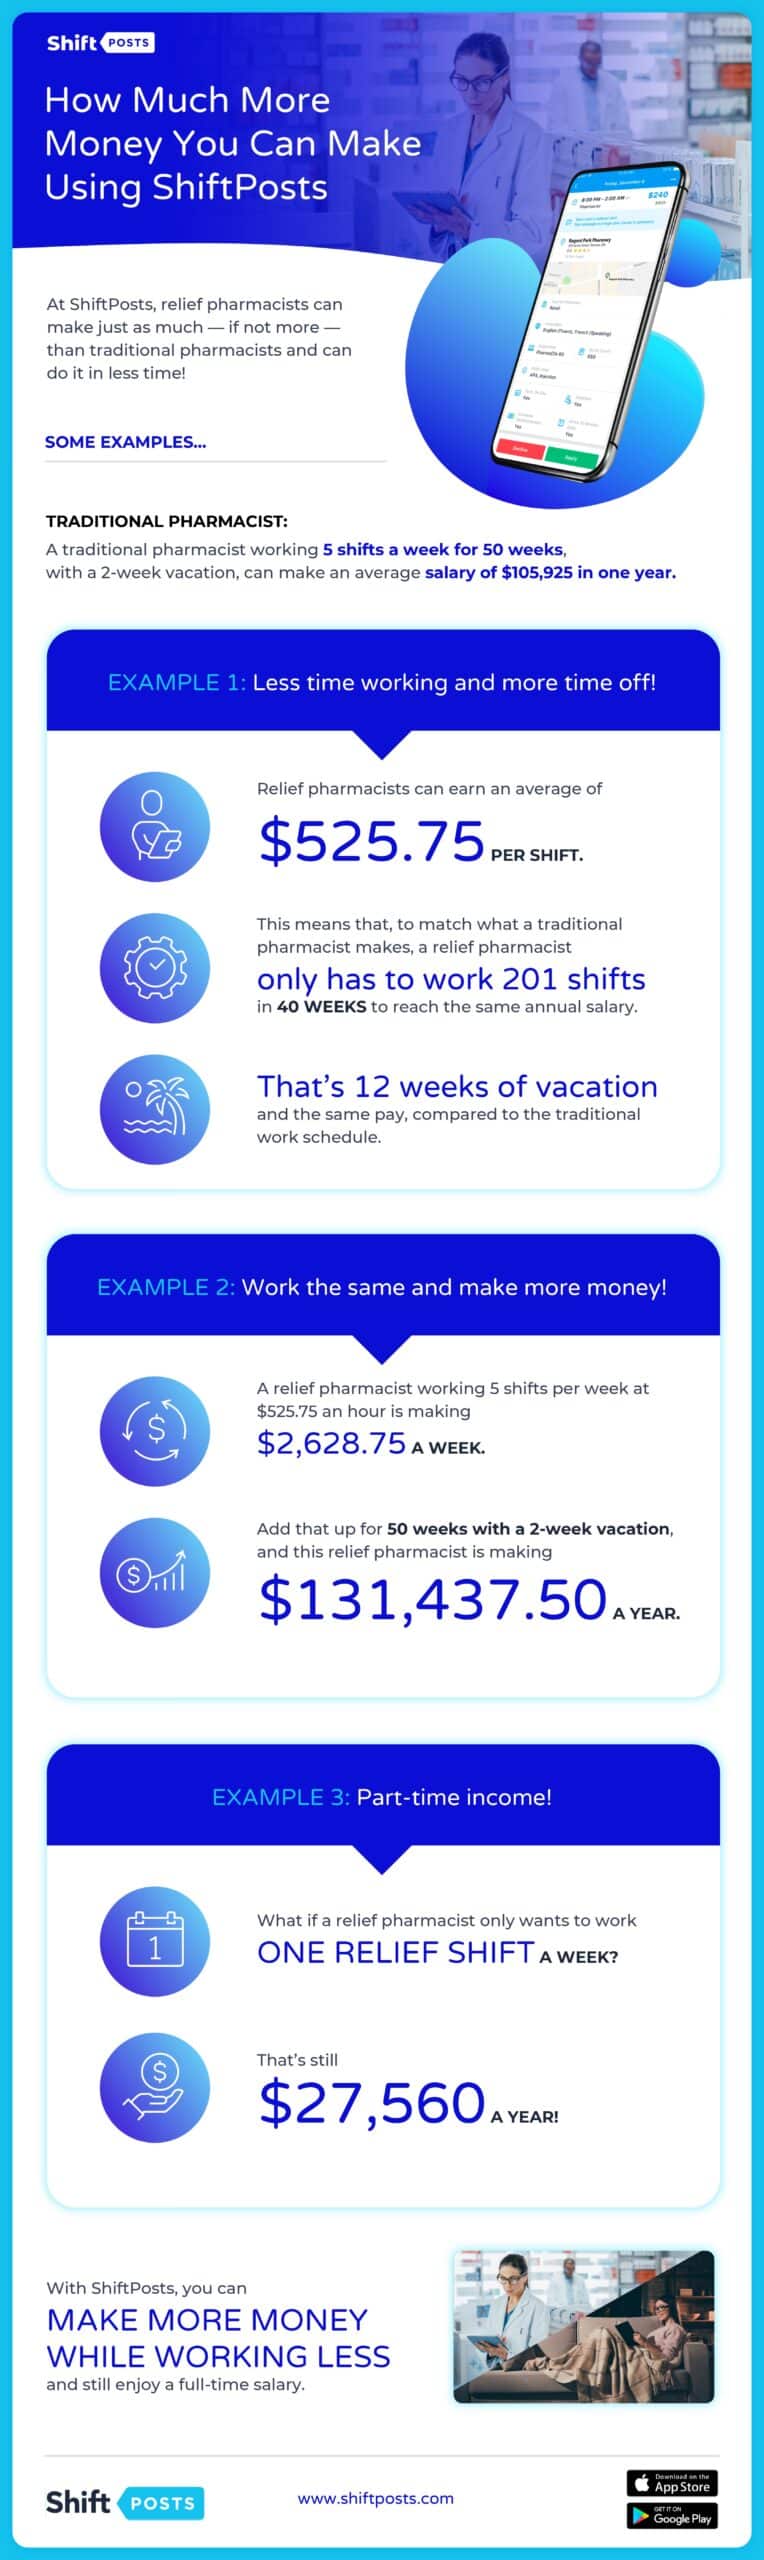 Infographic about how much more money can be earned by using ShiftPosts